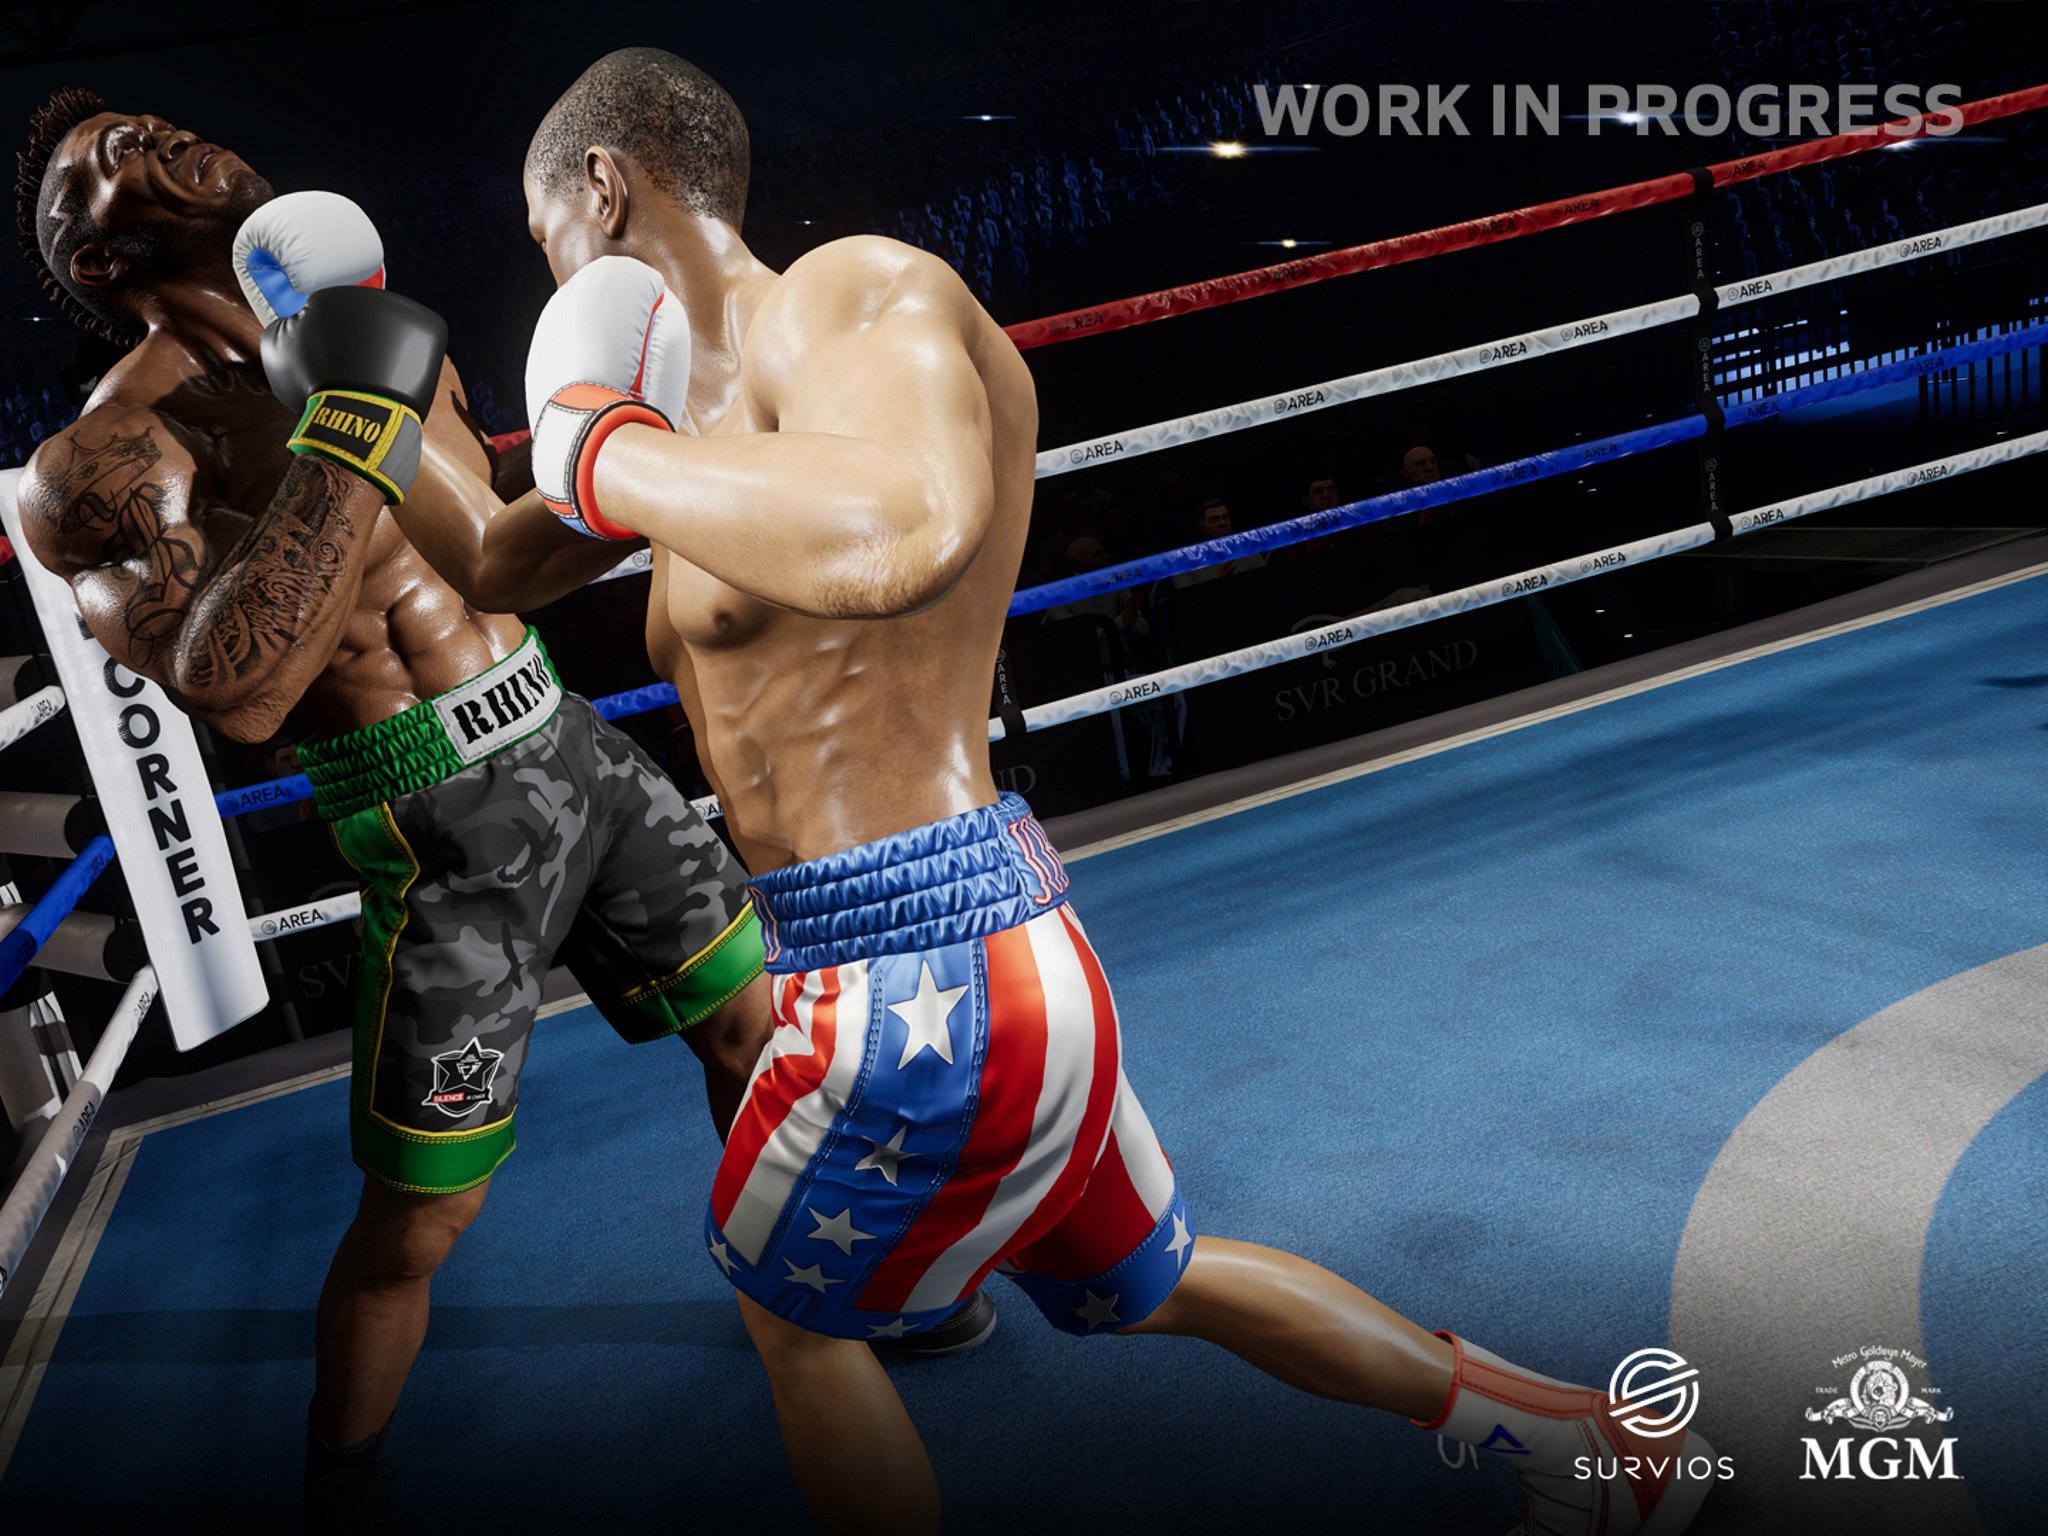 boxing video games